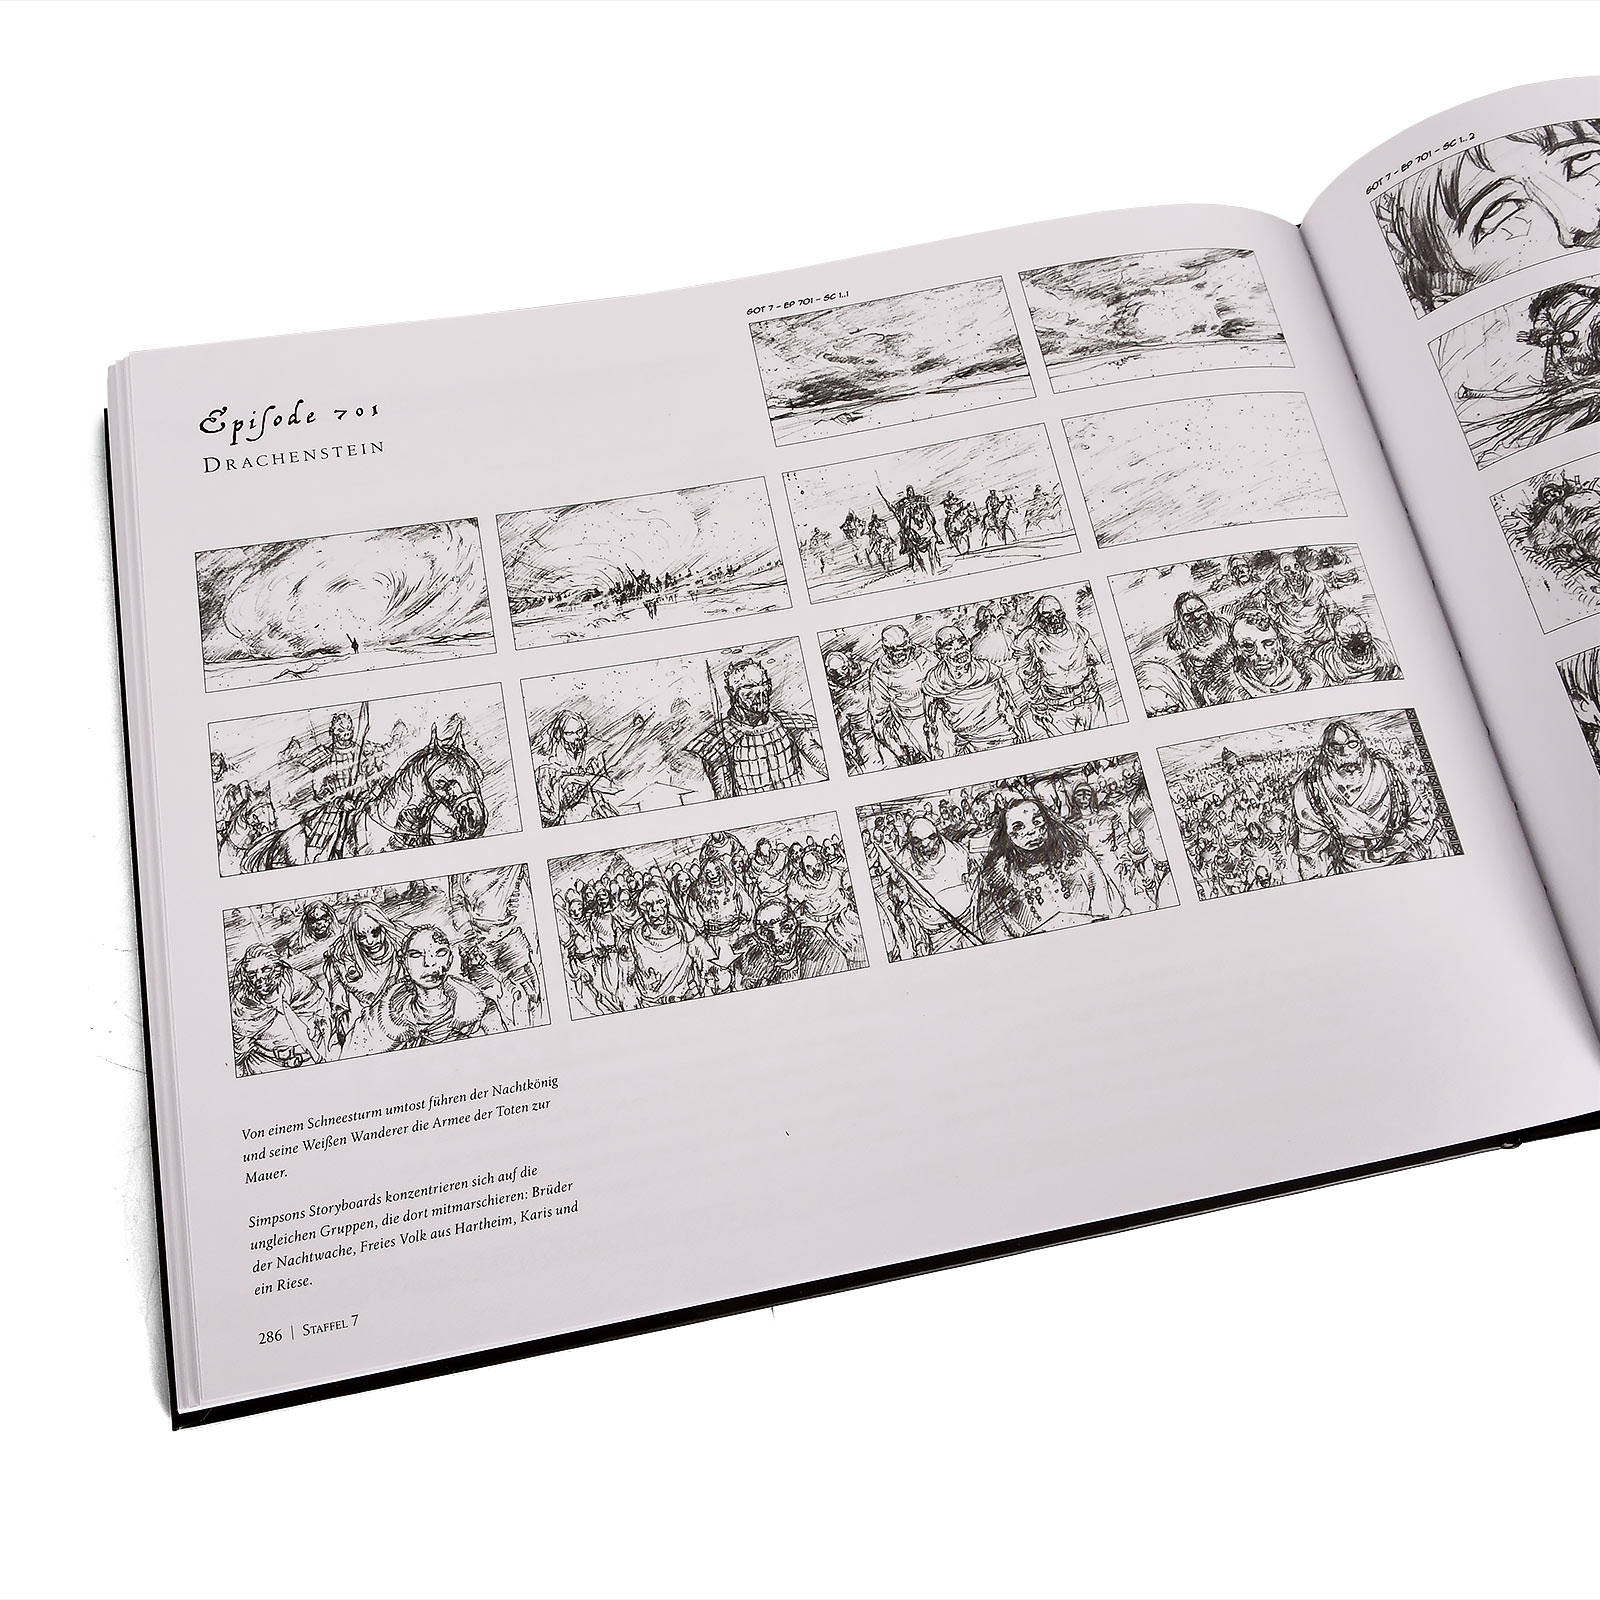 Game of Thrones - The Storyboards